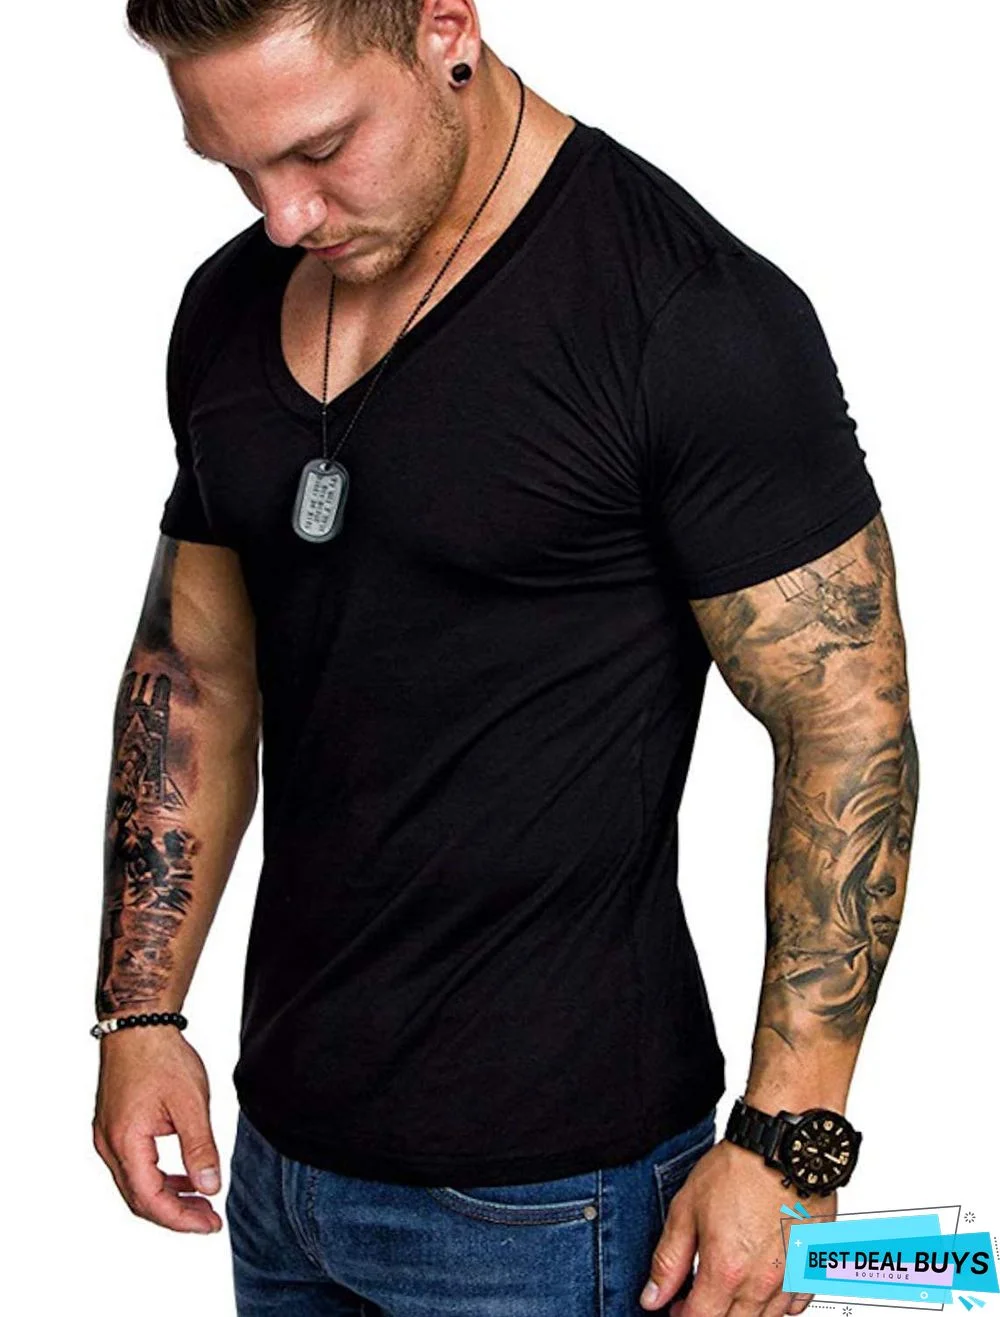 Men's T-Shirt Graphic Plus Size Pure Color Short Sleeve Daily Slim Tops Cotton Basic Dark Gray White Light Gray / Sports / Summer